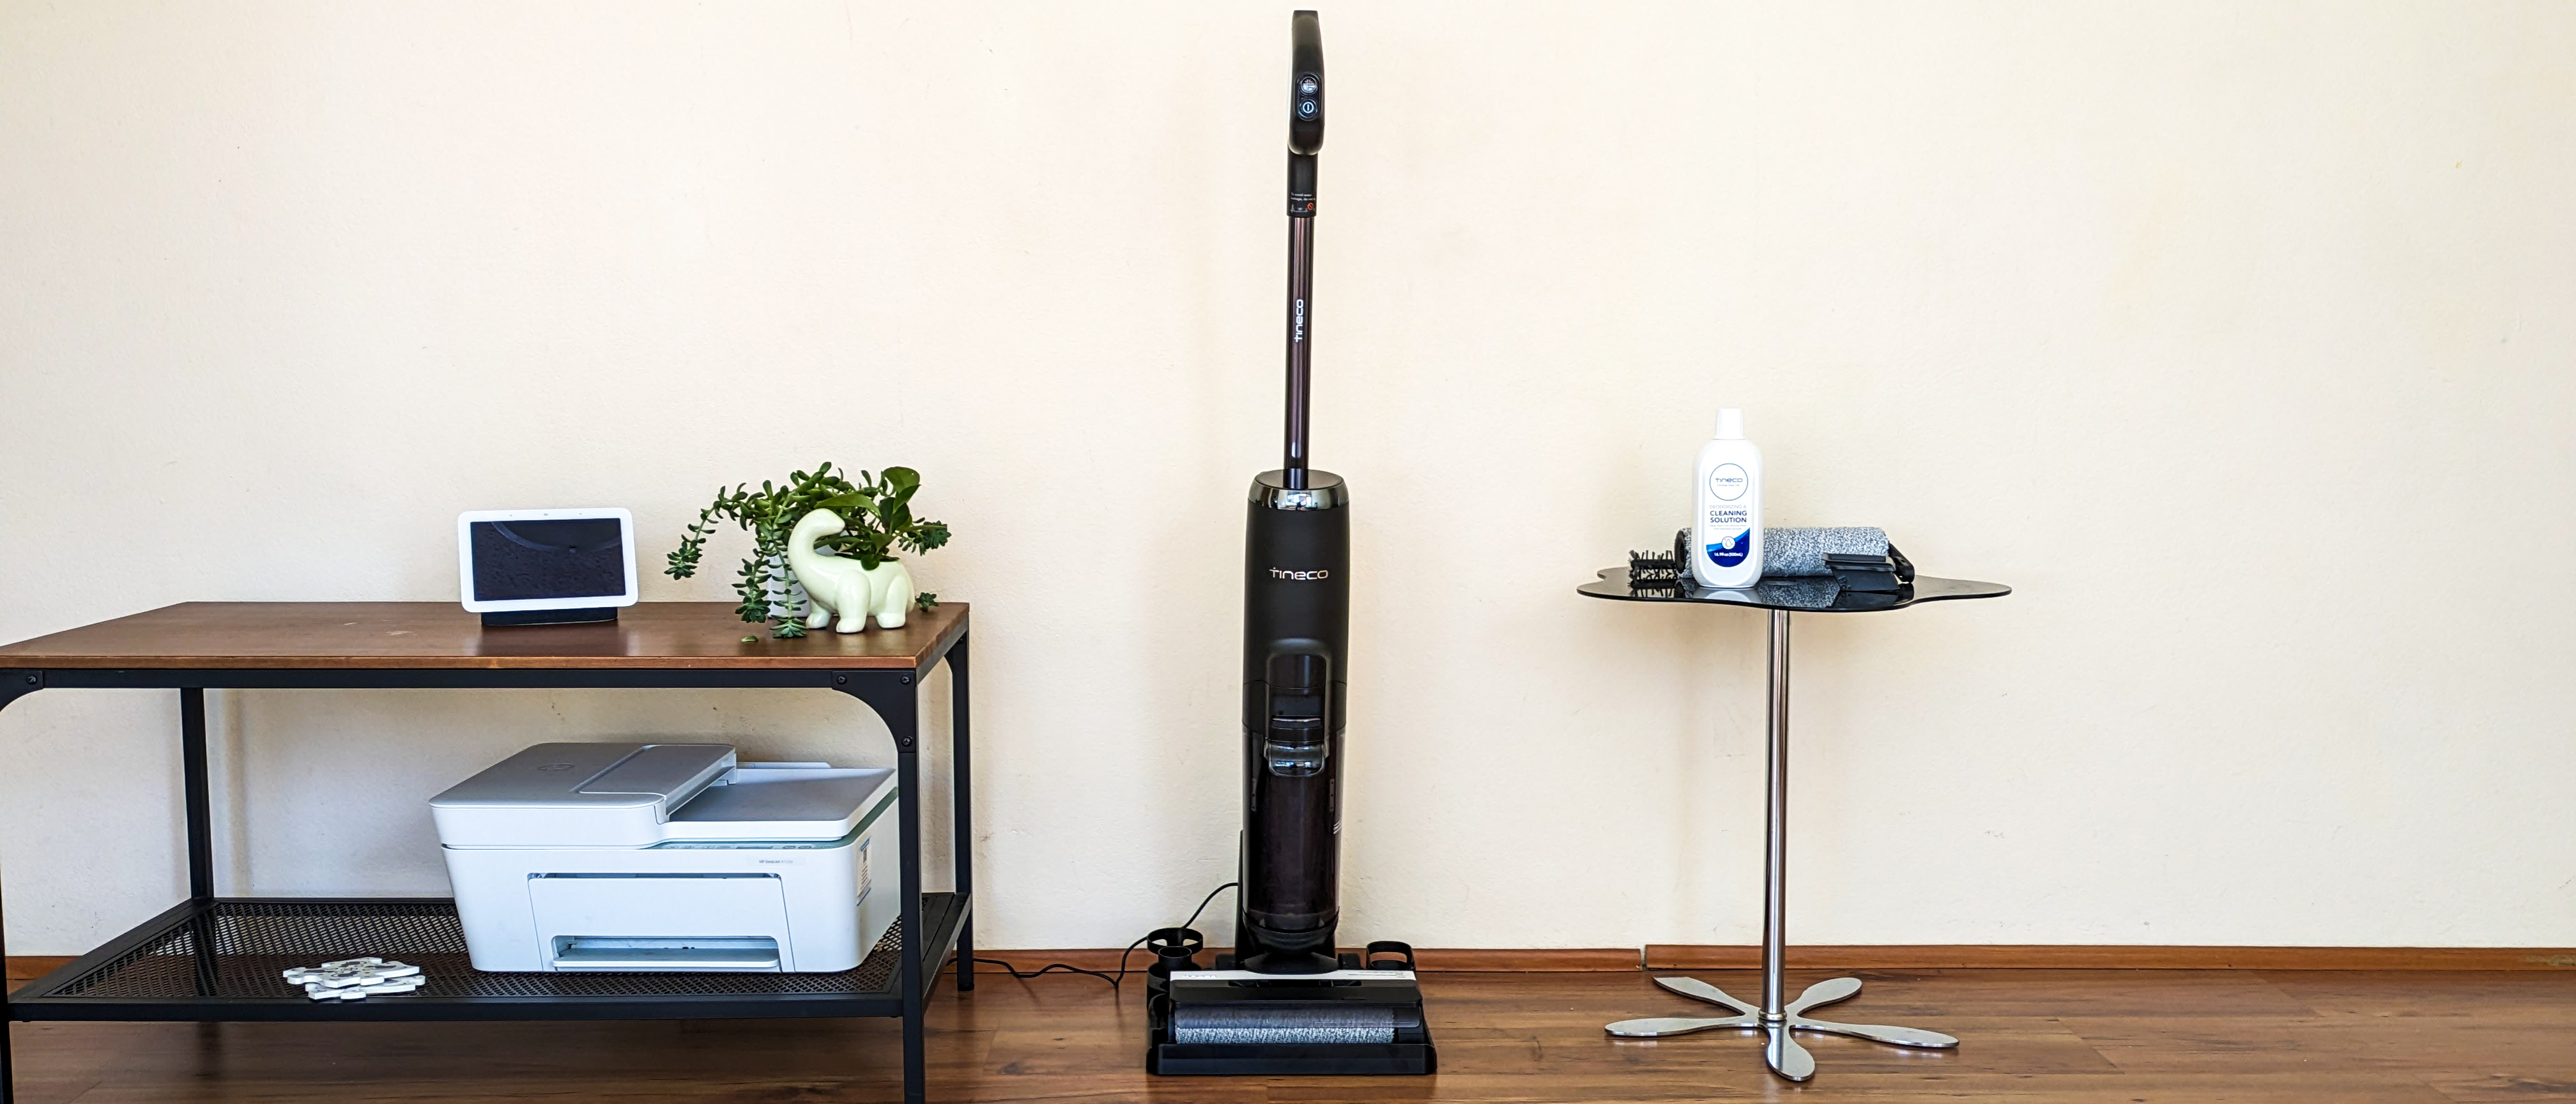 Tineco Floor One S5 Cordless Wet/Dry Upright Vacuum review